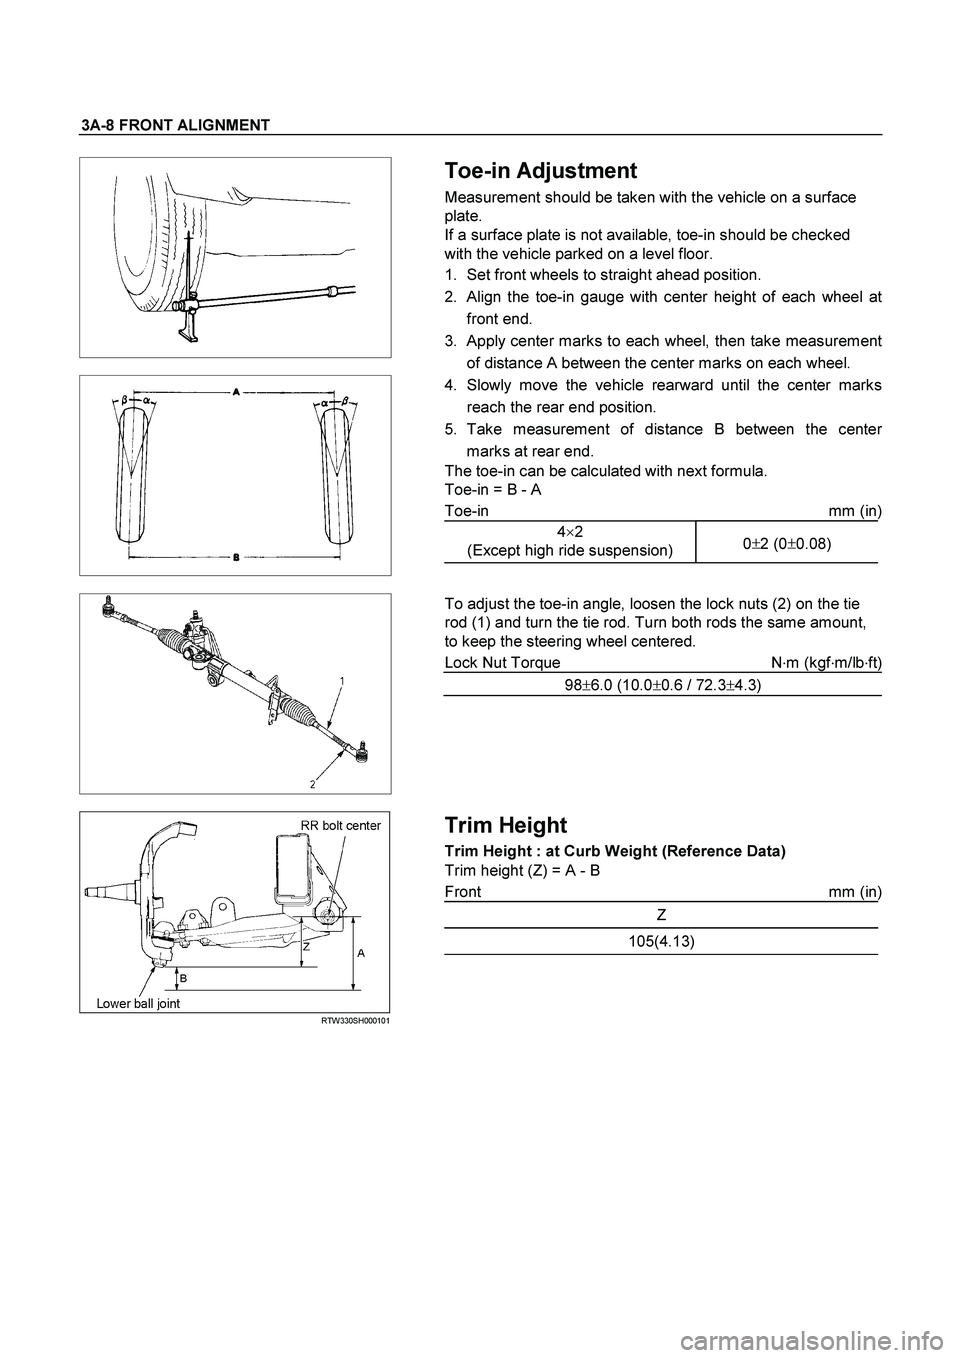 ISUZU TF SERIES 2004  Workshop Manual 3A-8 FRONT ALIGNMENT 
 
   
 
   
 Toe-in Adjustment 
Measurement should be taken with the vehicle on a surface 
plate. 
If a surface plate is not available, toe-in should be checked 
with the vehicle